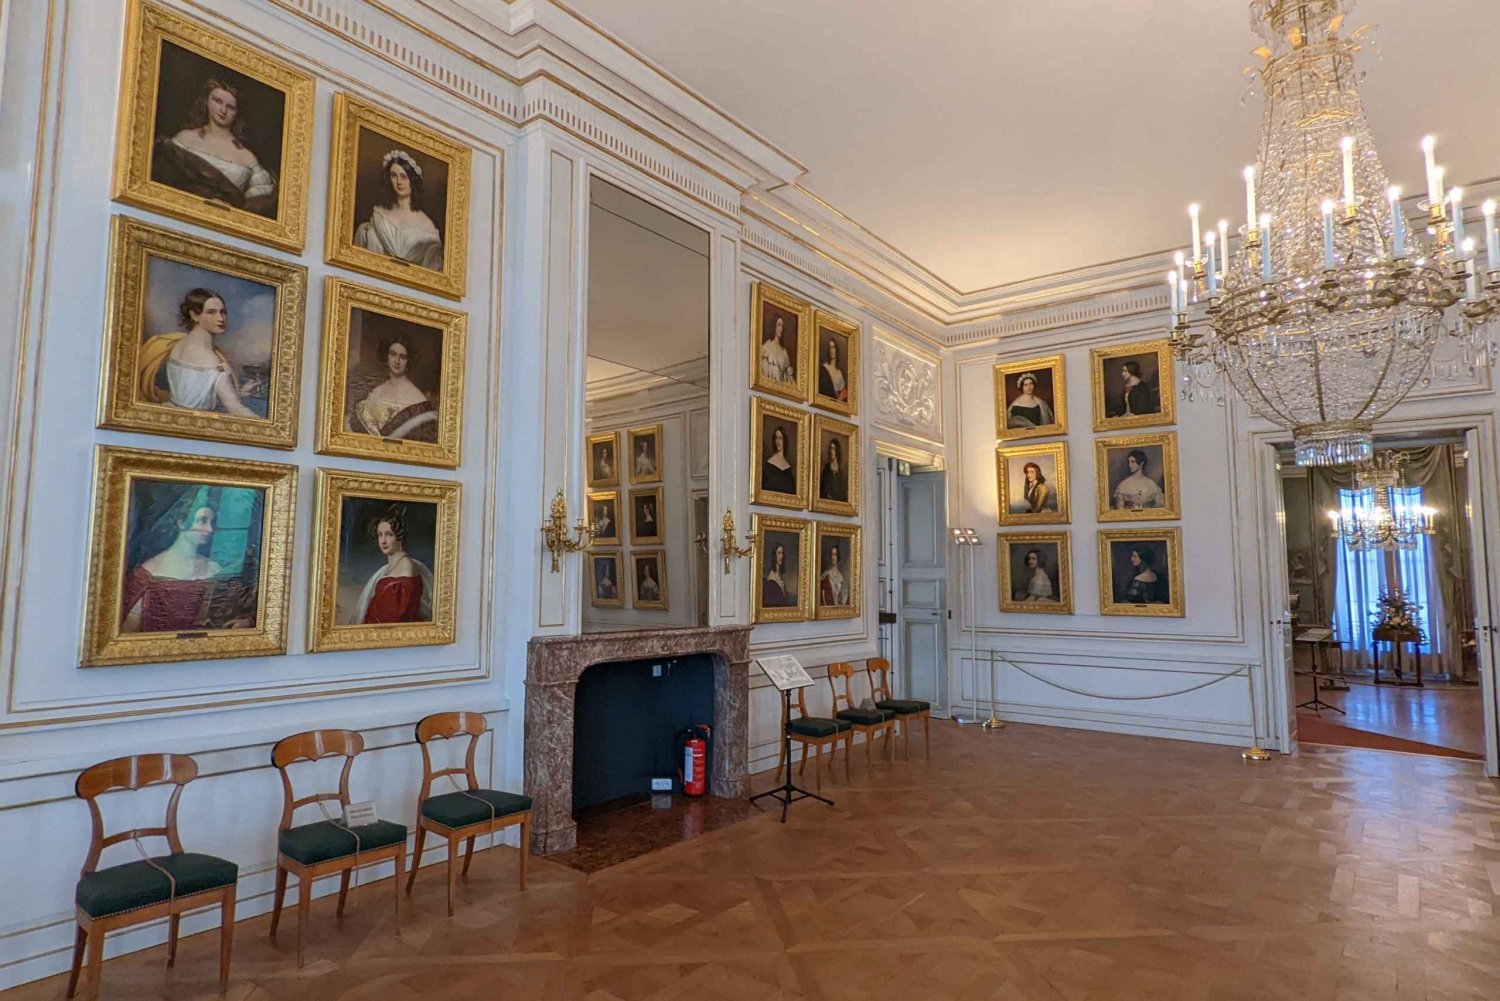 Munich: Nymphenburg Palace incl. Marstall: Tour and tickets